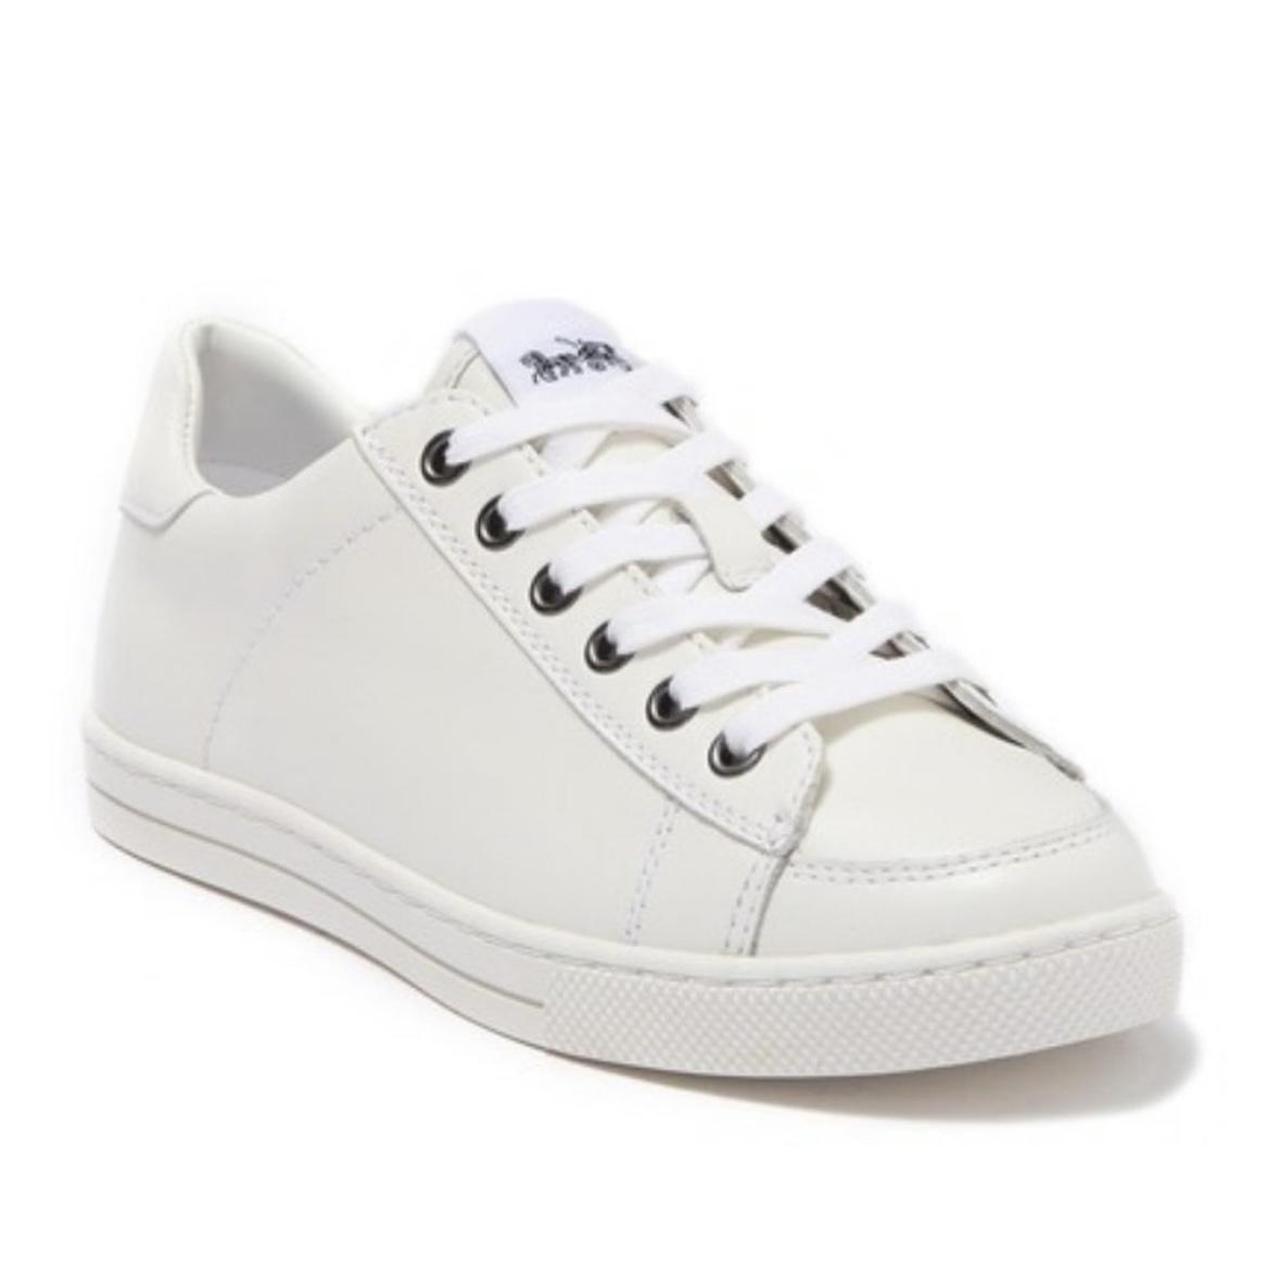 Coach CITYSOLE White - Free delivery | Spartoo NET ! - Shoes Low top  trainers Women USD/$130.40